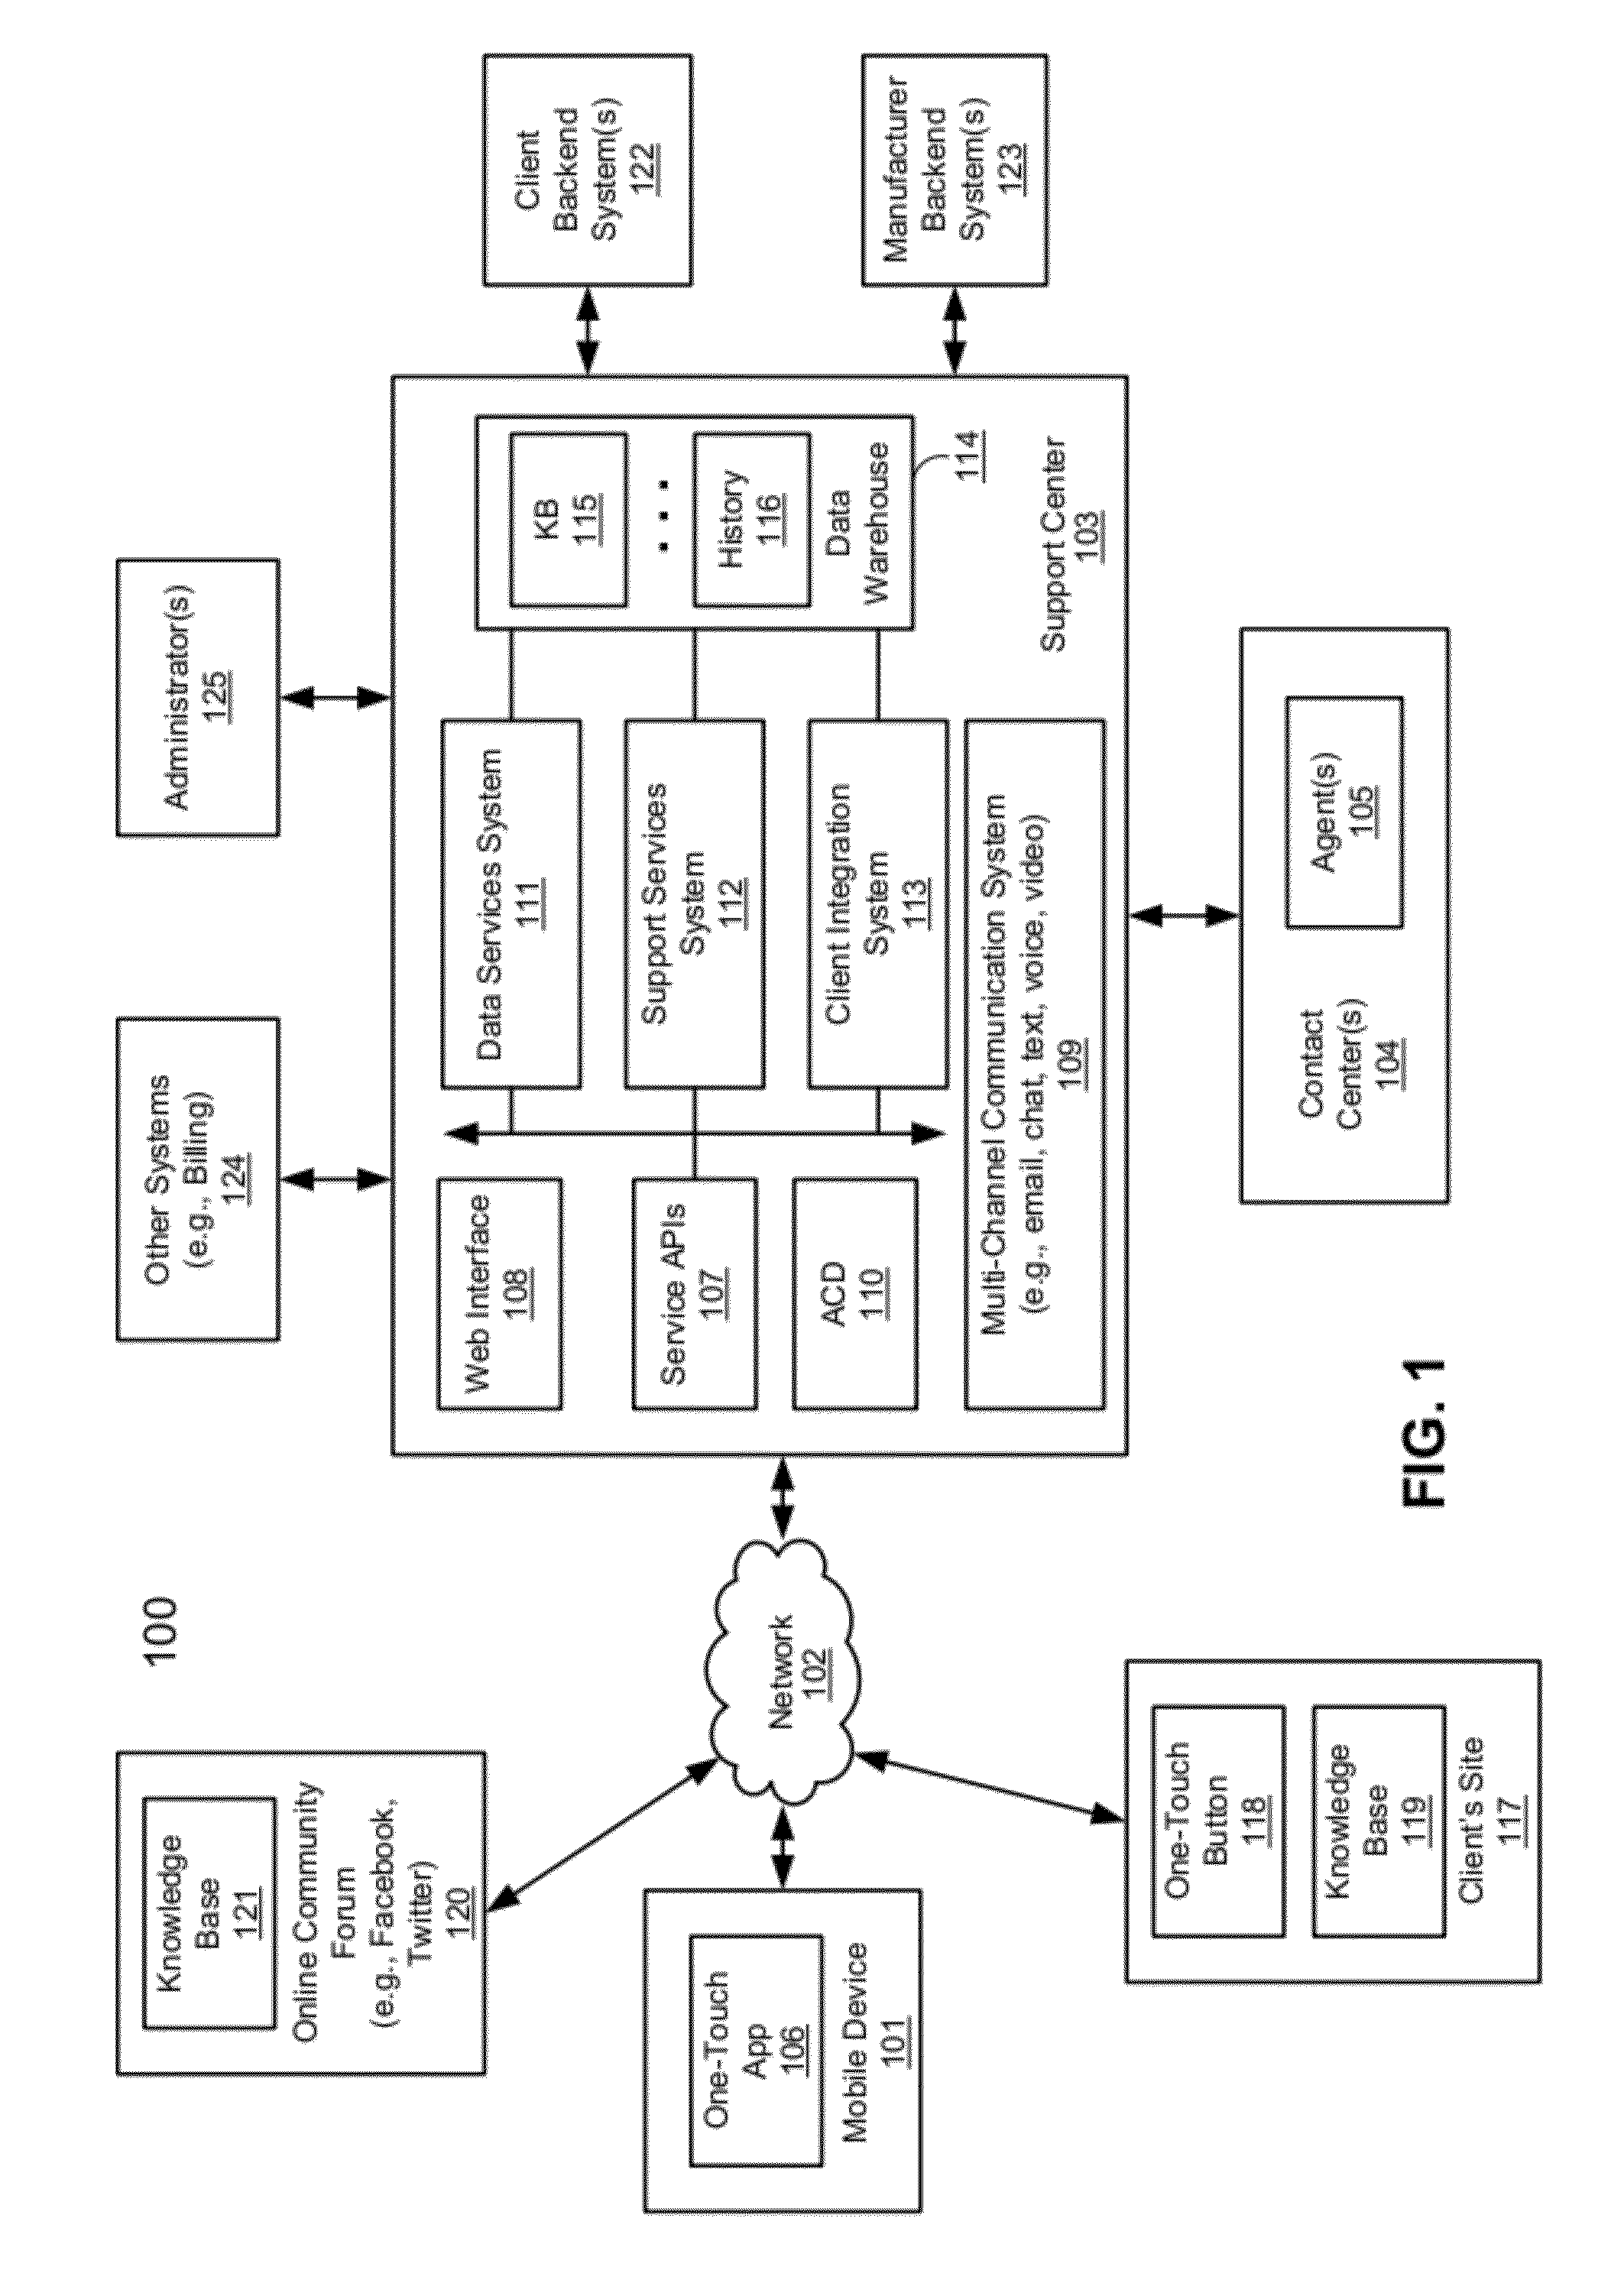 Methods for providing cross-vendor support services